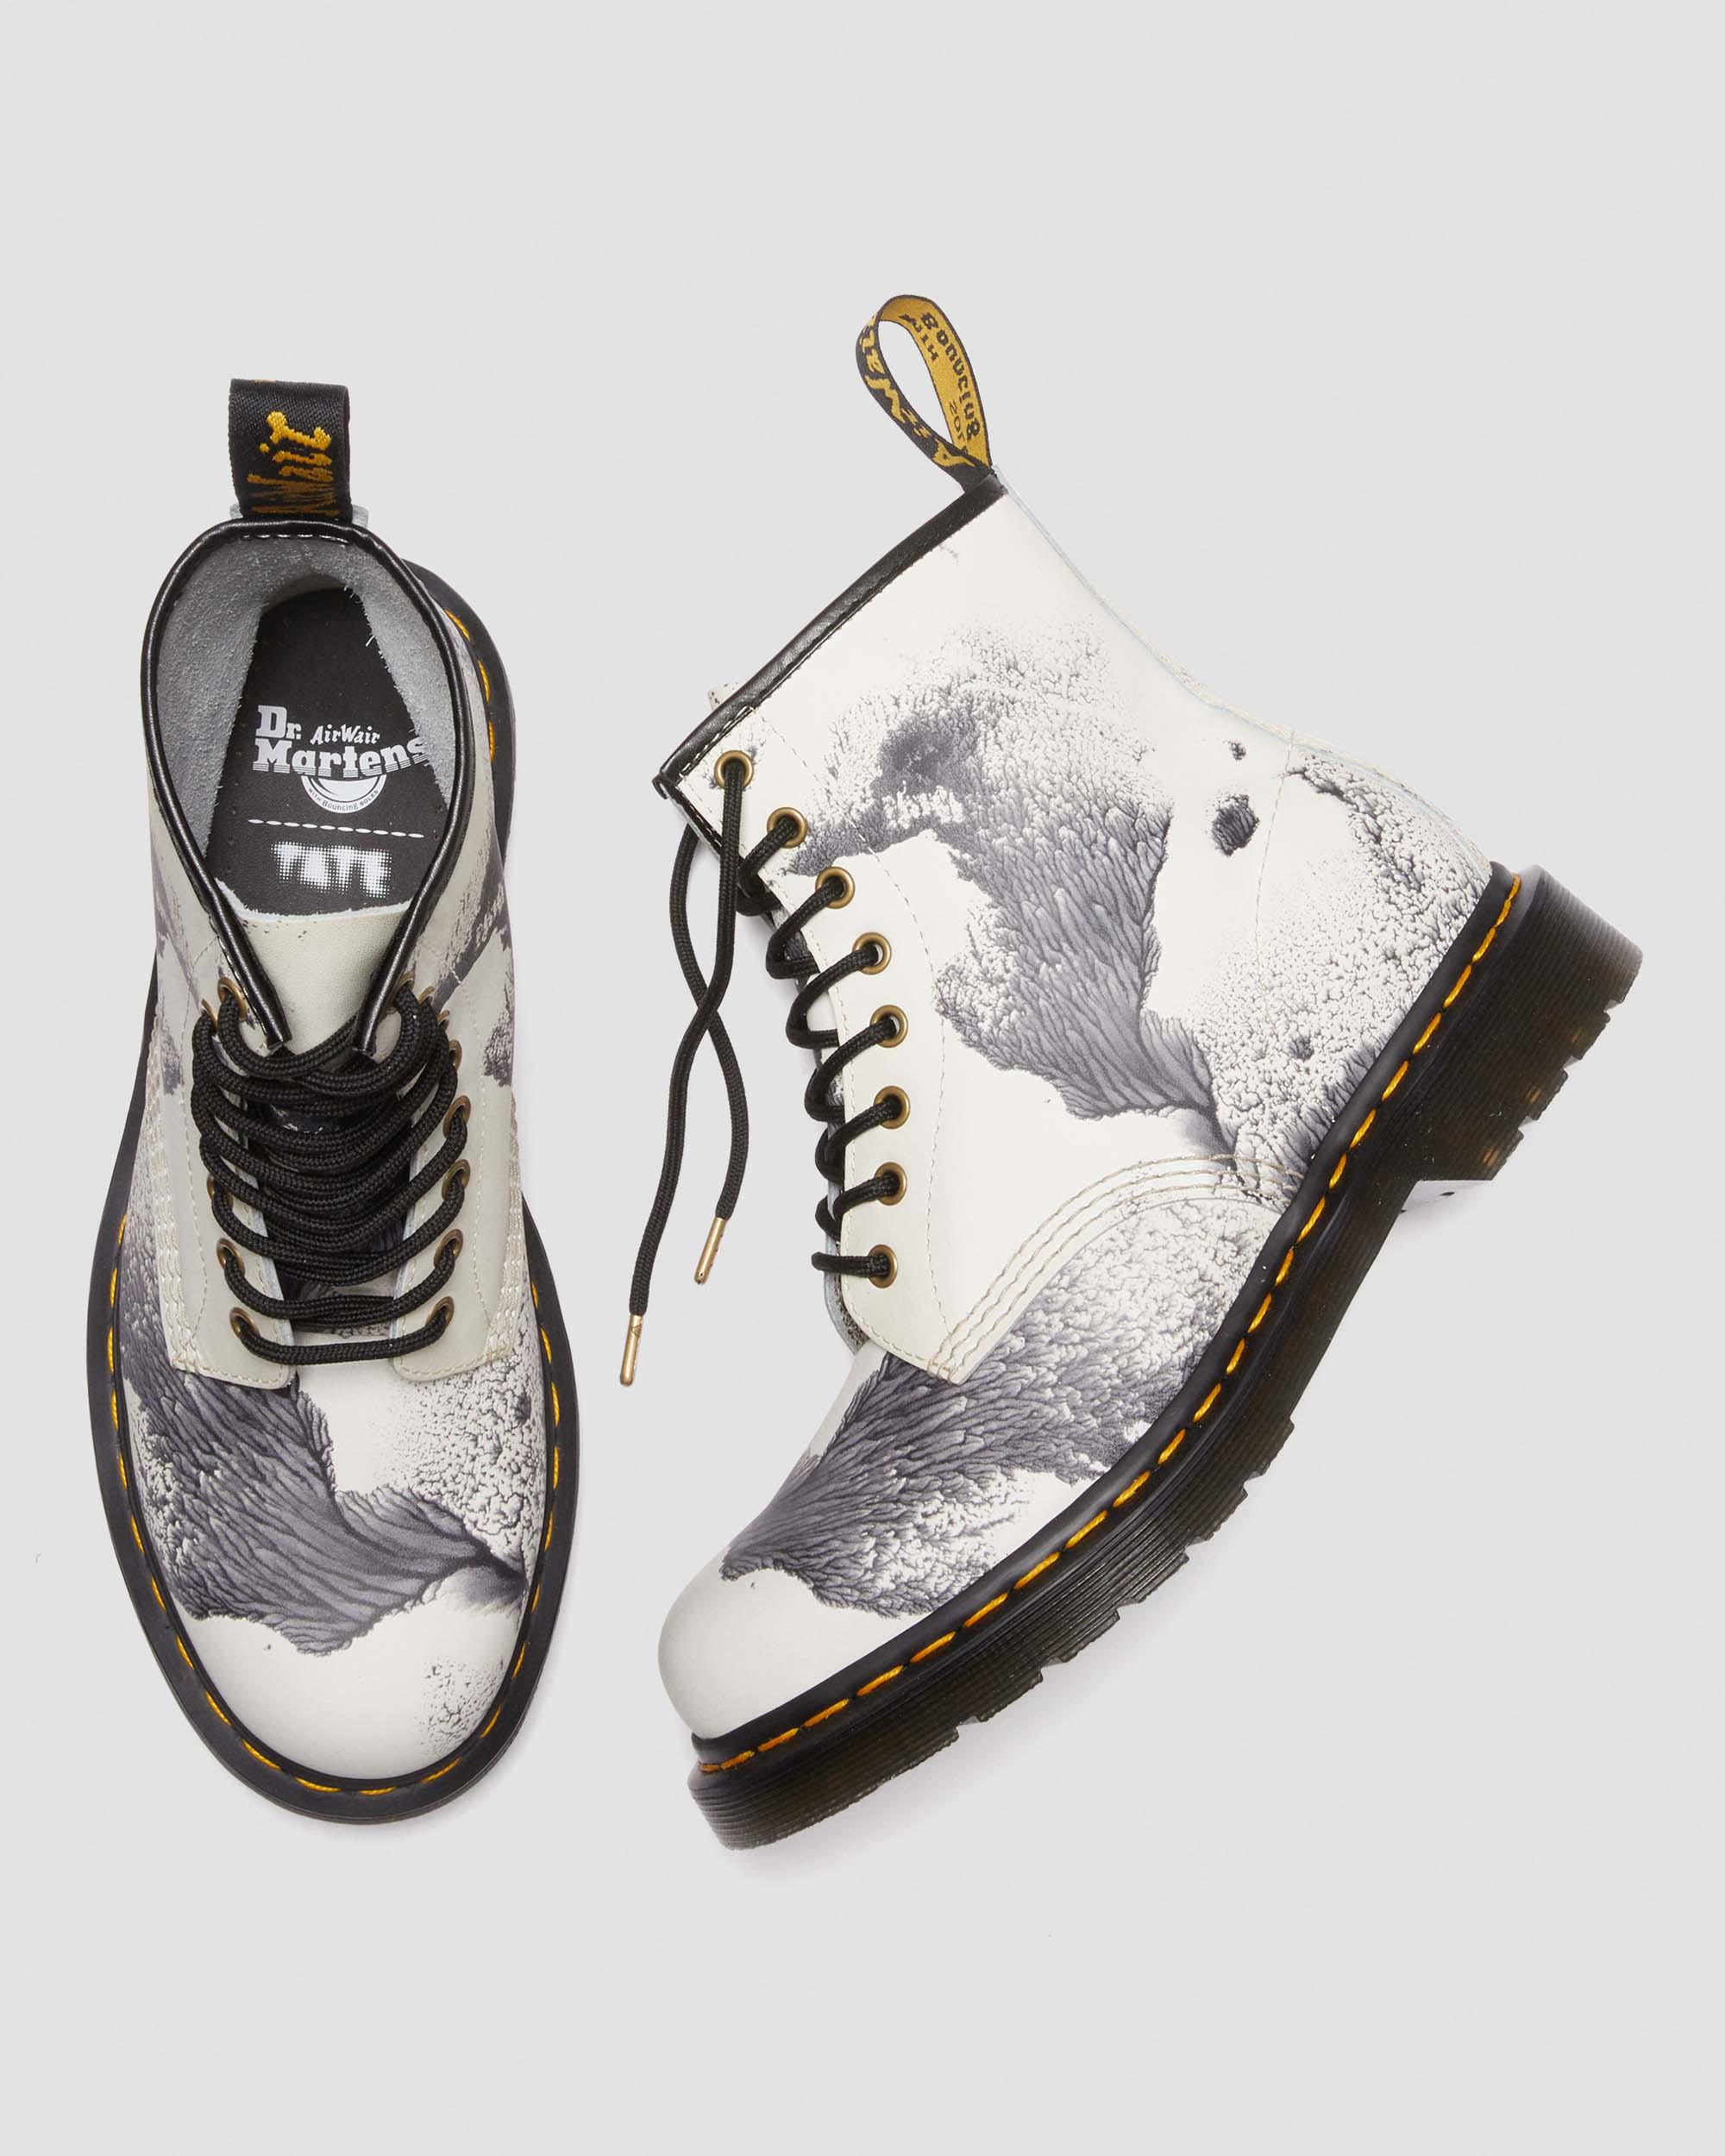 1460 Tate Decalcomania Backhand Leather Lace Up Boots1460 Tate 'Decalcomania' Backhand Leather Lace Up Boots Dr. Martens